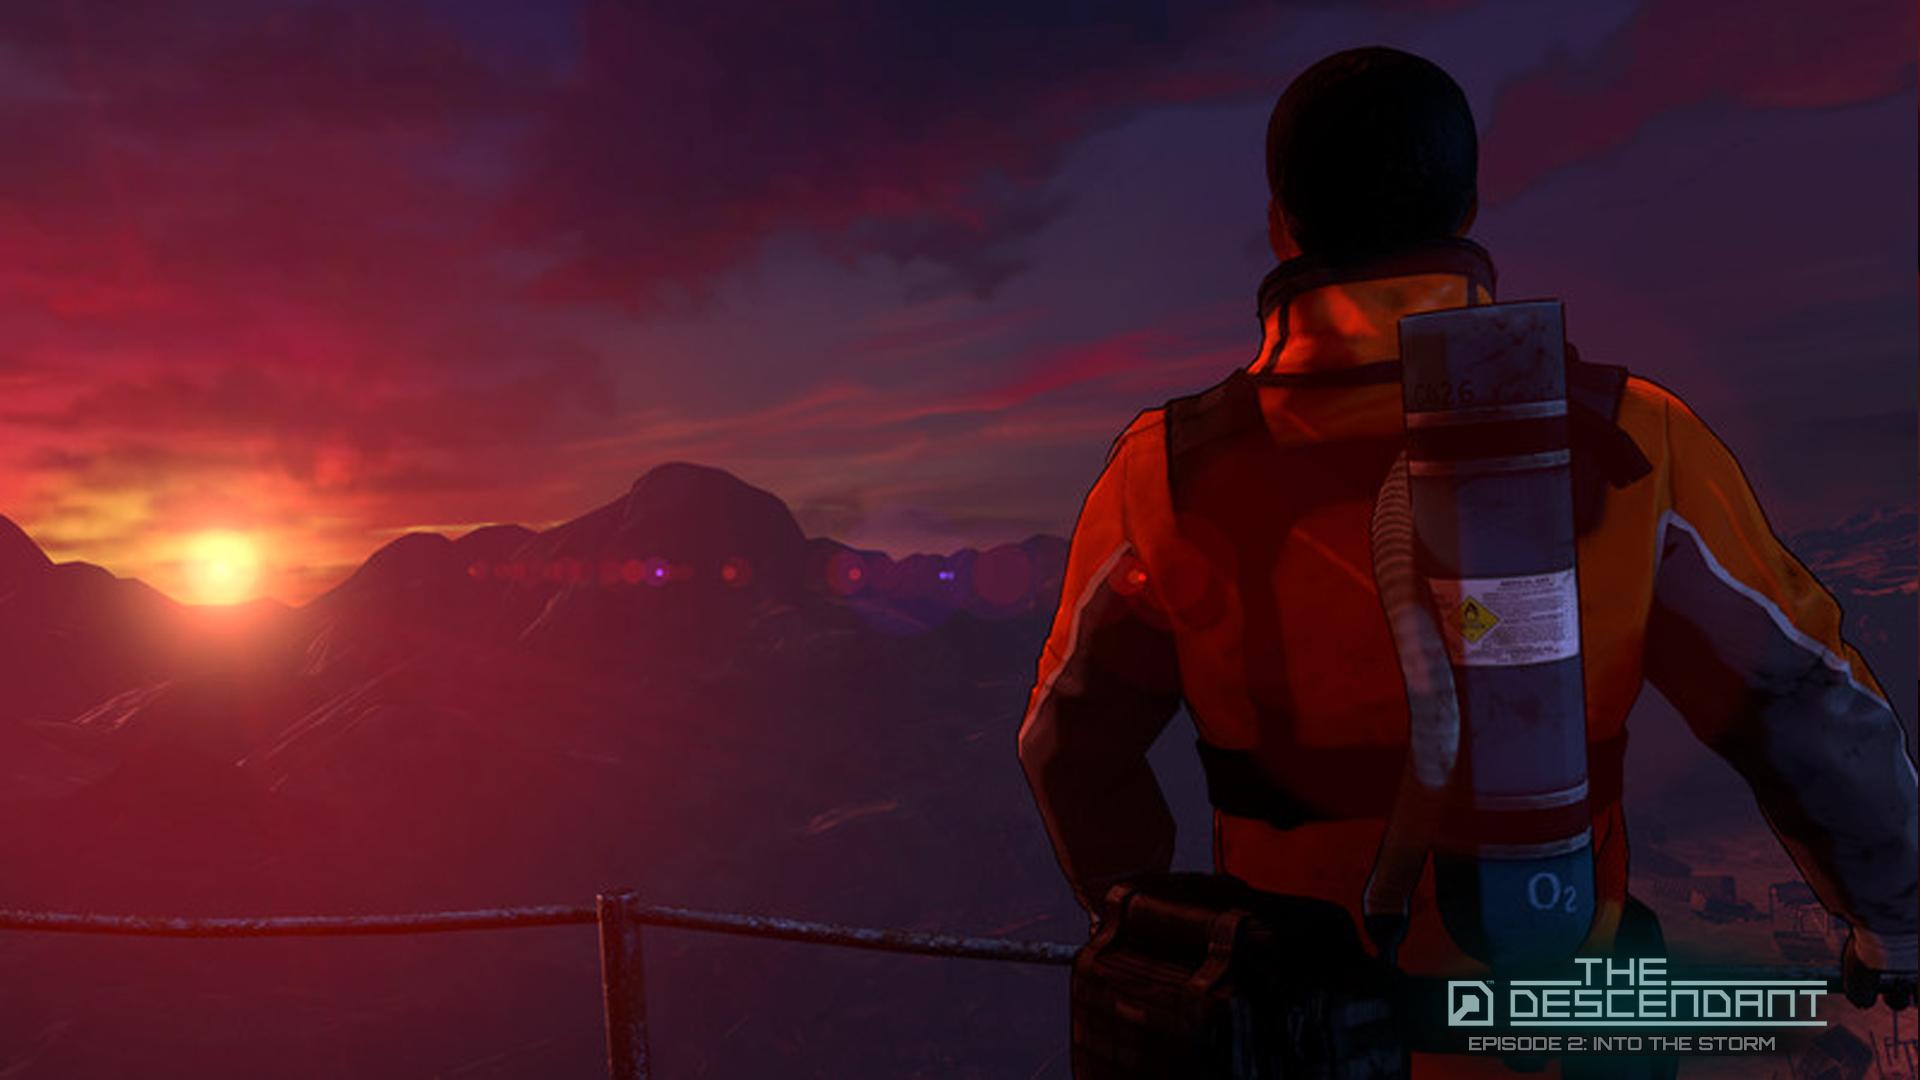 Screenshot №18 from game The Descendant